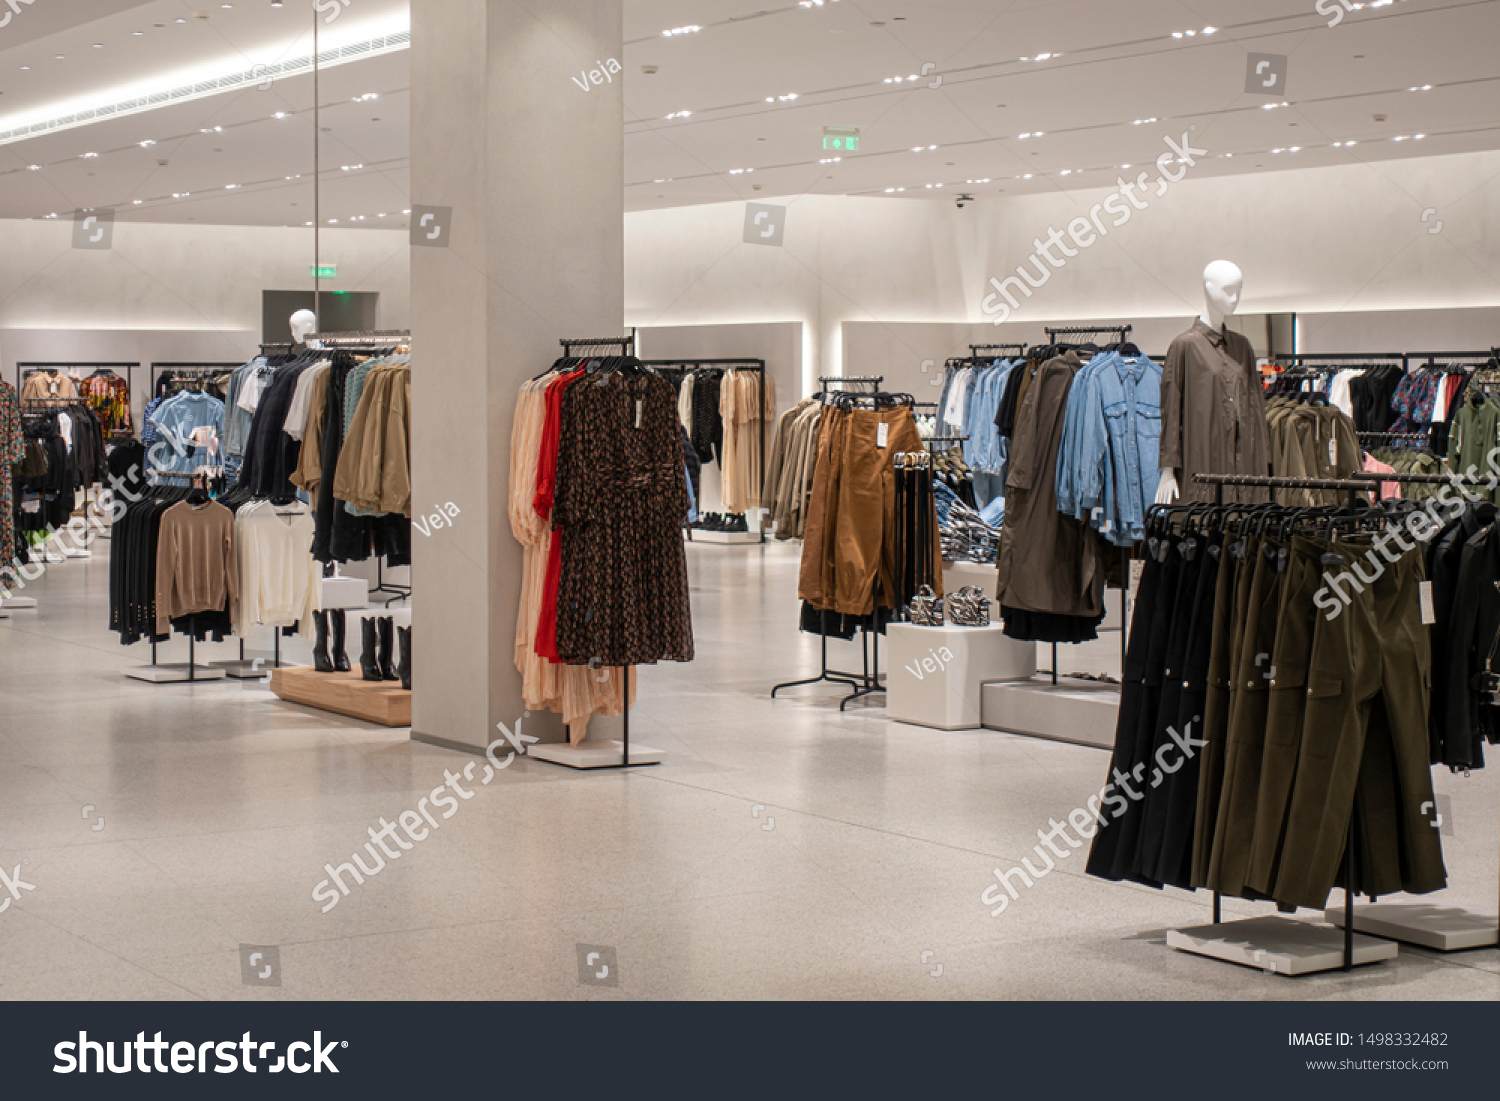 Modern fashionable brand interior of clothing store inside shopping center #1498332482